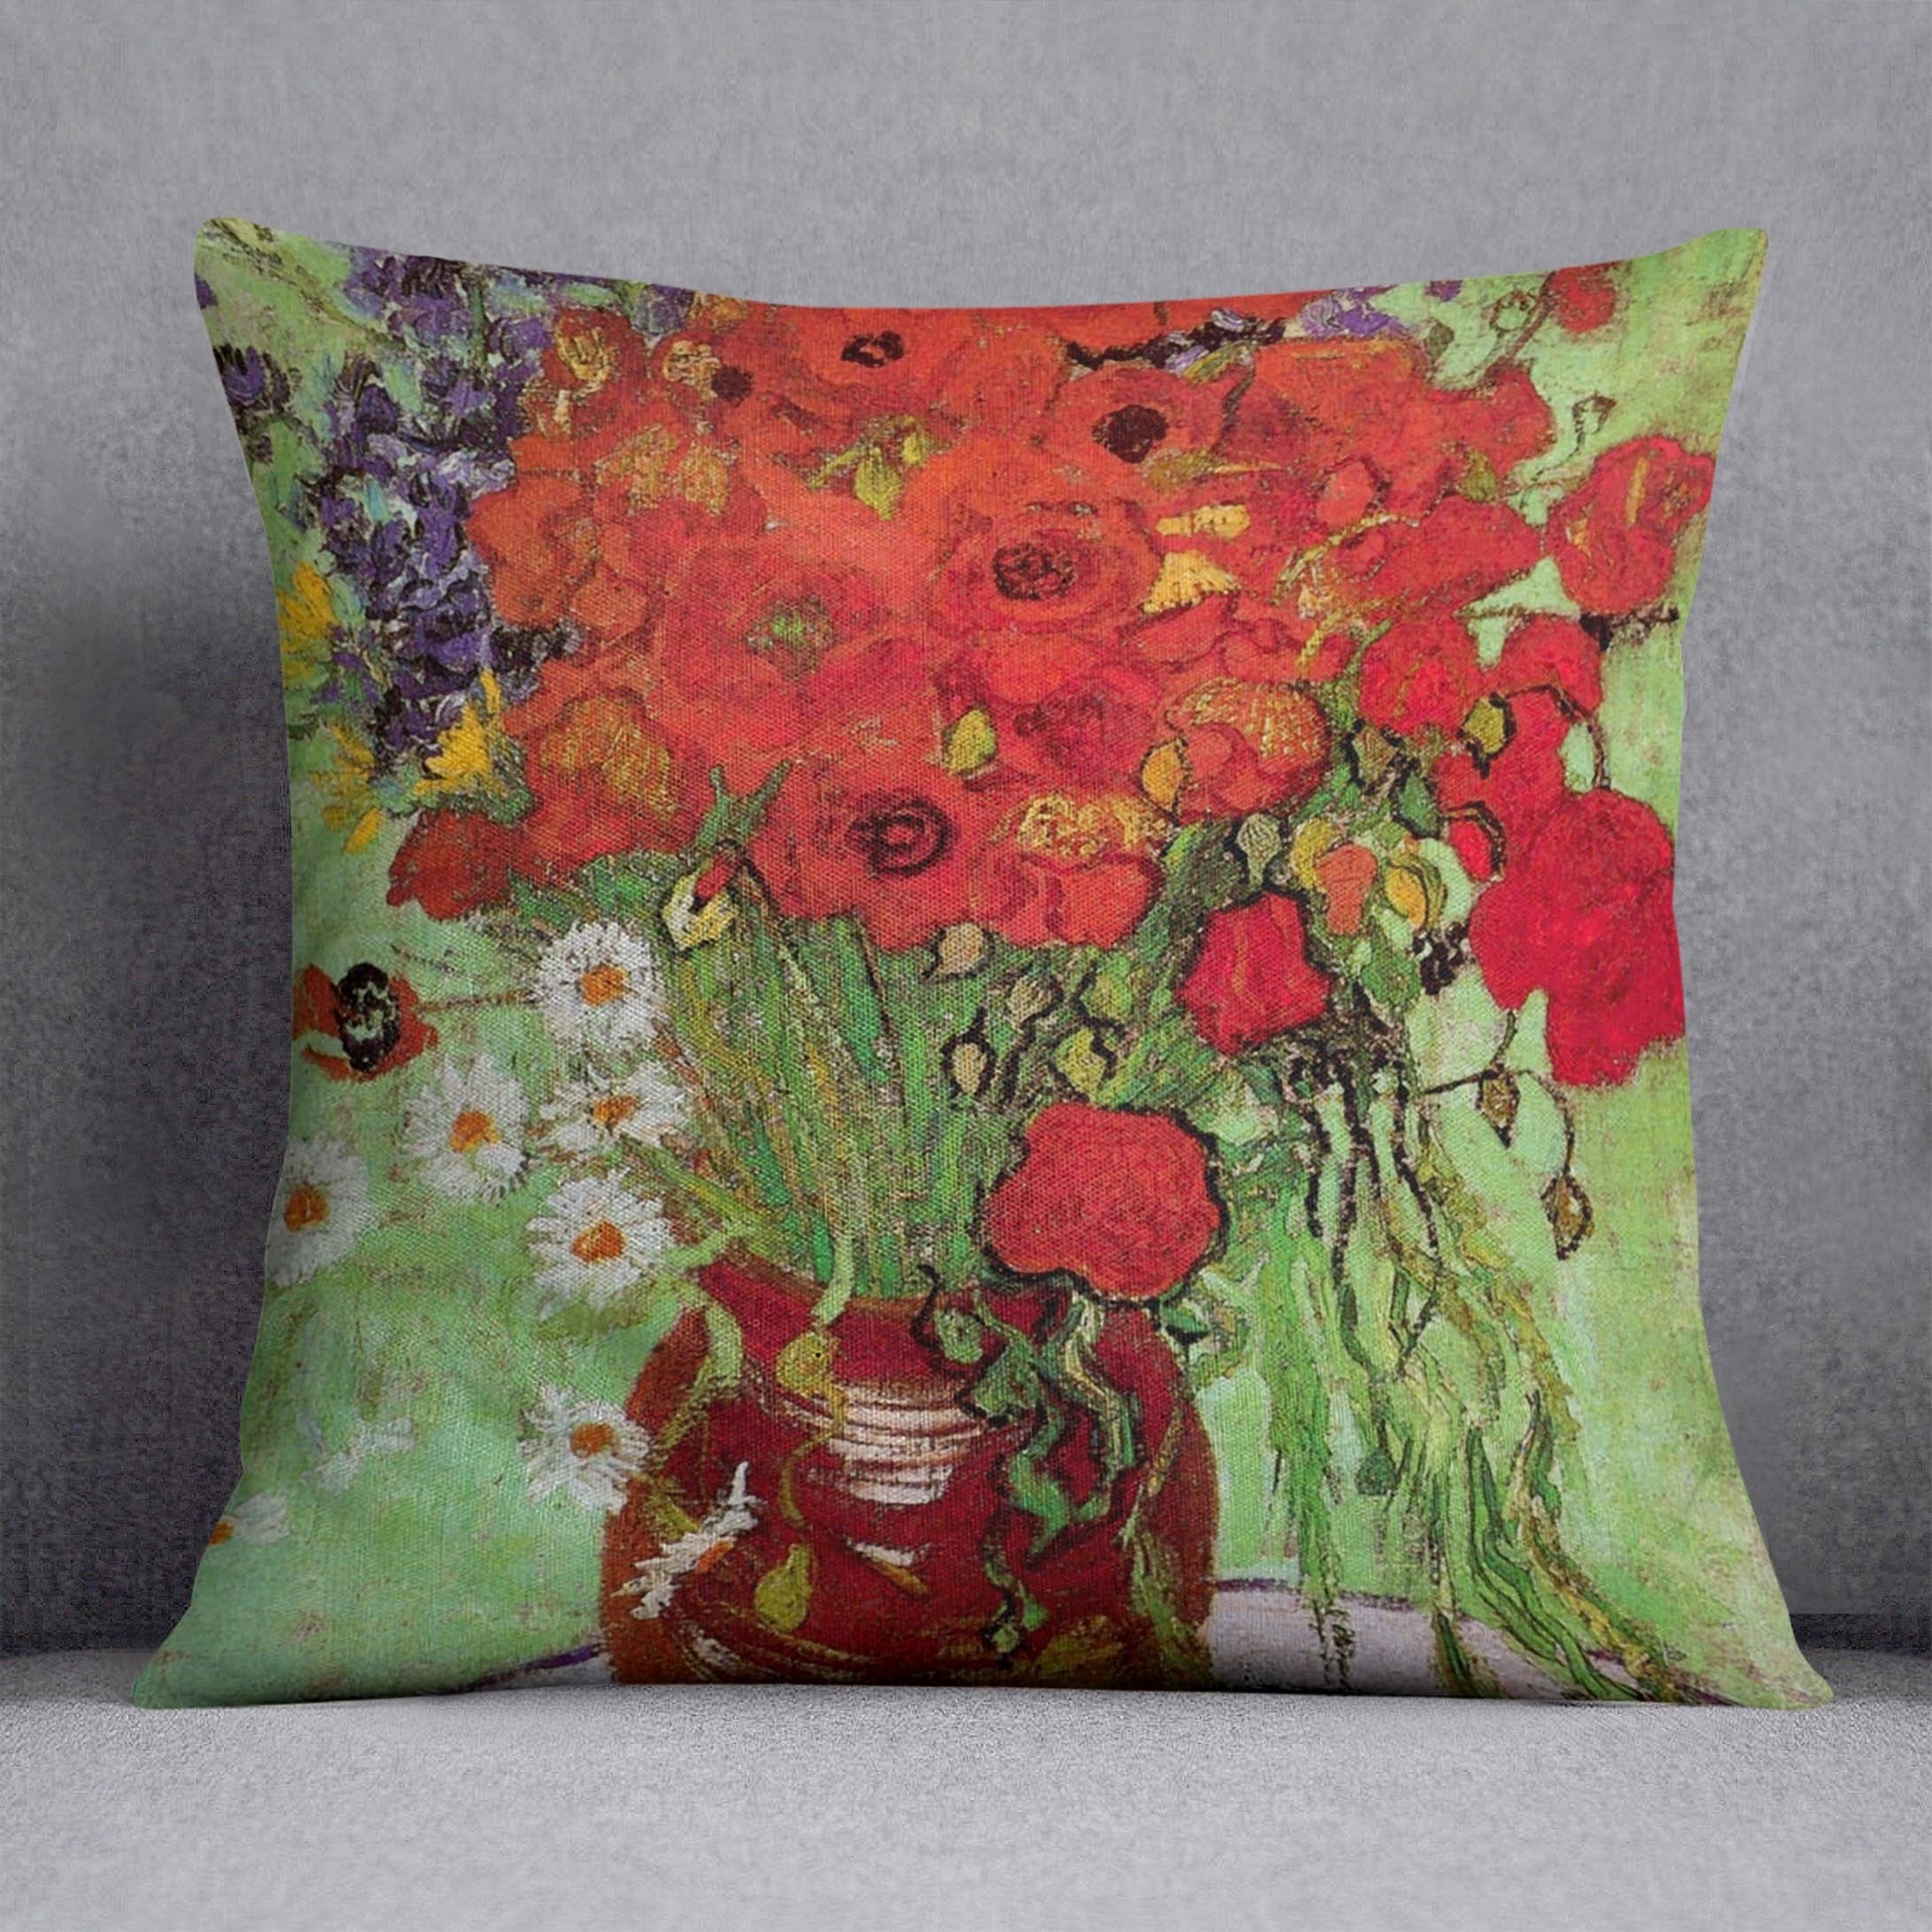 Still Life Red Poppies and Daisies by Van Gogh Throw Pillow